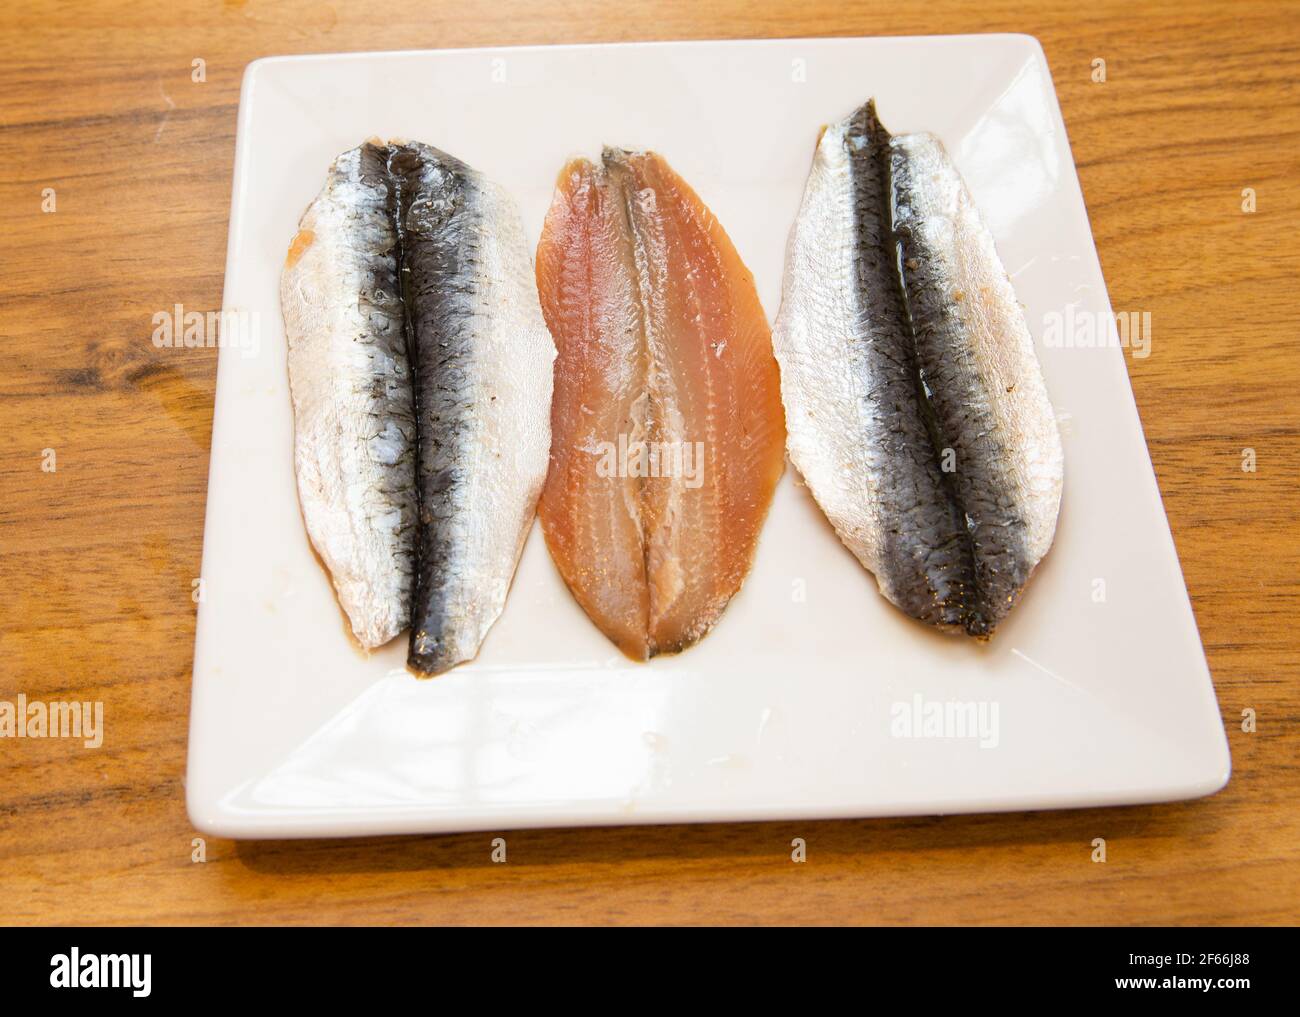 Raw North East Atlantic Butterfly Sardines on a plate before being cooked Stock Photo